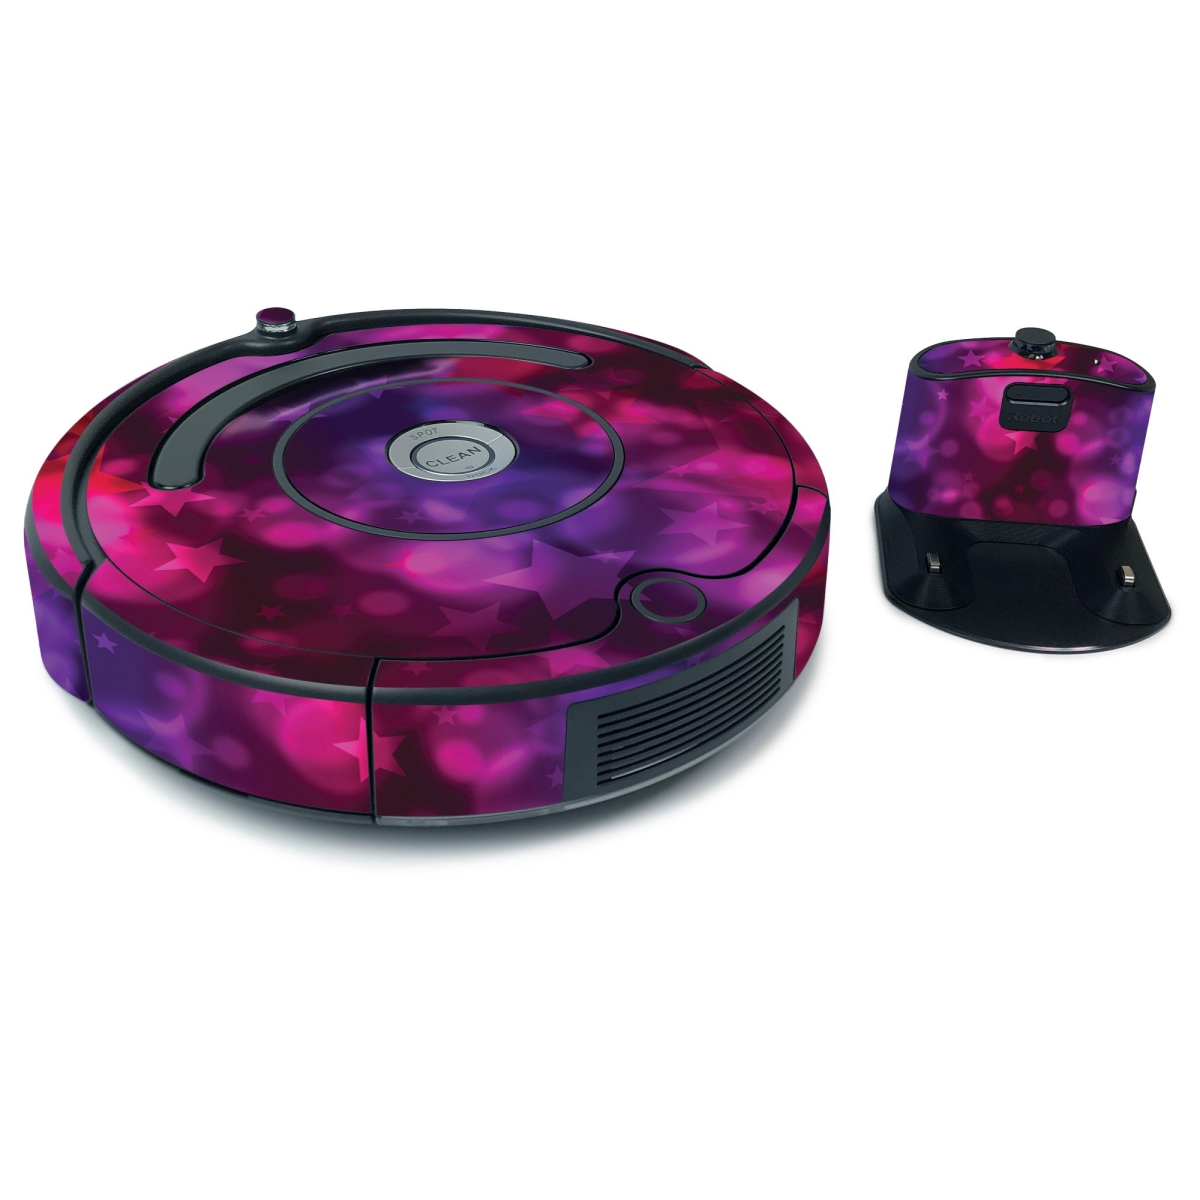 Picture of MightySkins IRRO675-Star Power Skin Decal Wrap for iRobot Roomba 675 Max Coverage Sticker - Star Power